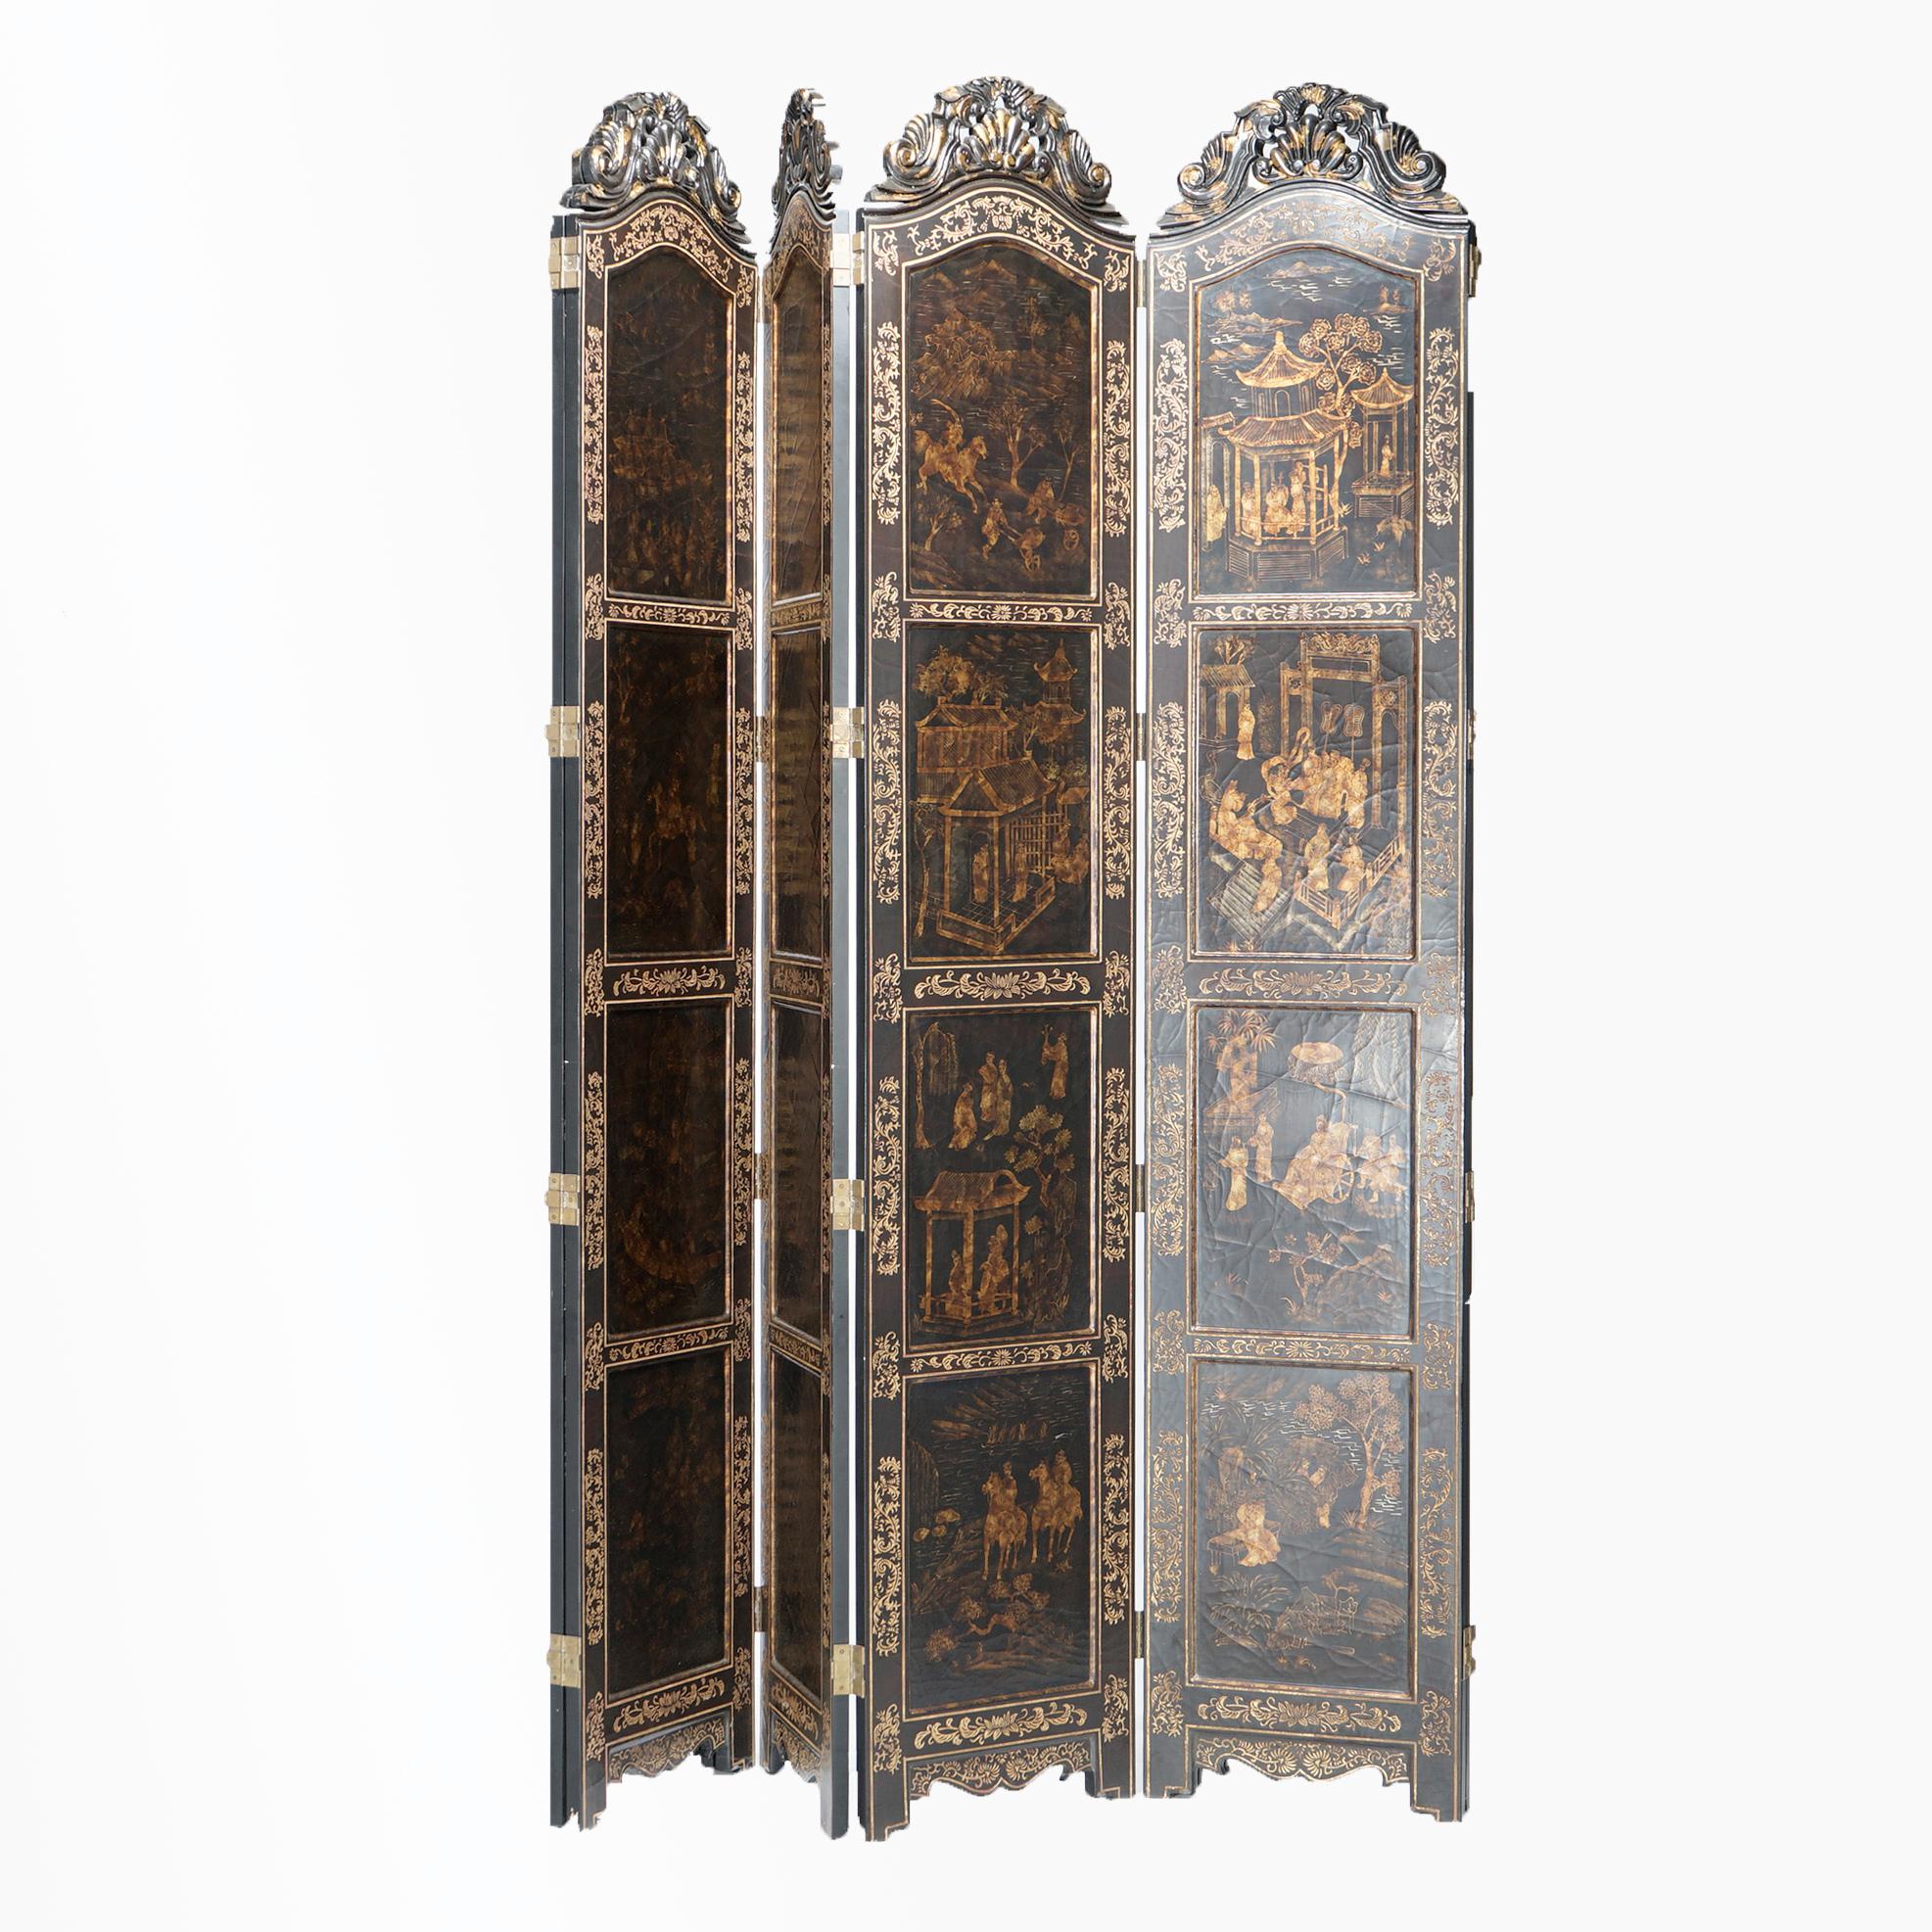 A large oriental screen by Maitland Smith with six ebonized wood panels having foliate carved and pierced crests and Chinoiserie paint decorated panels with genre village scenes, 20th century.
Offers wood construction.

Measures- 106''H x 20.25''W x